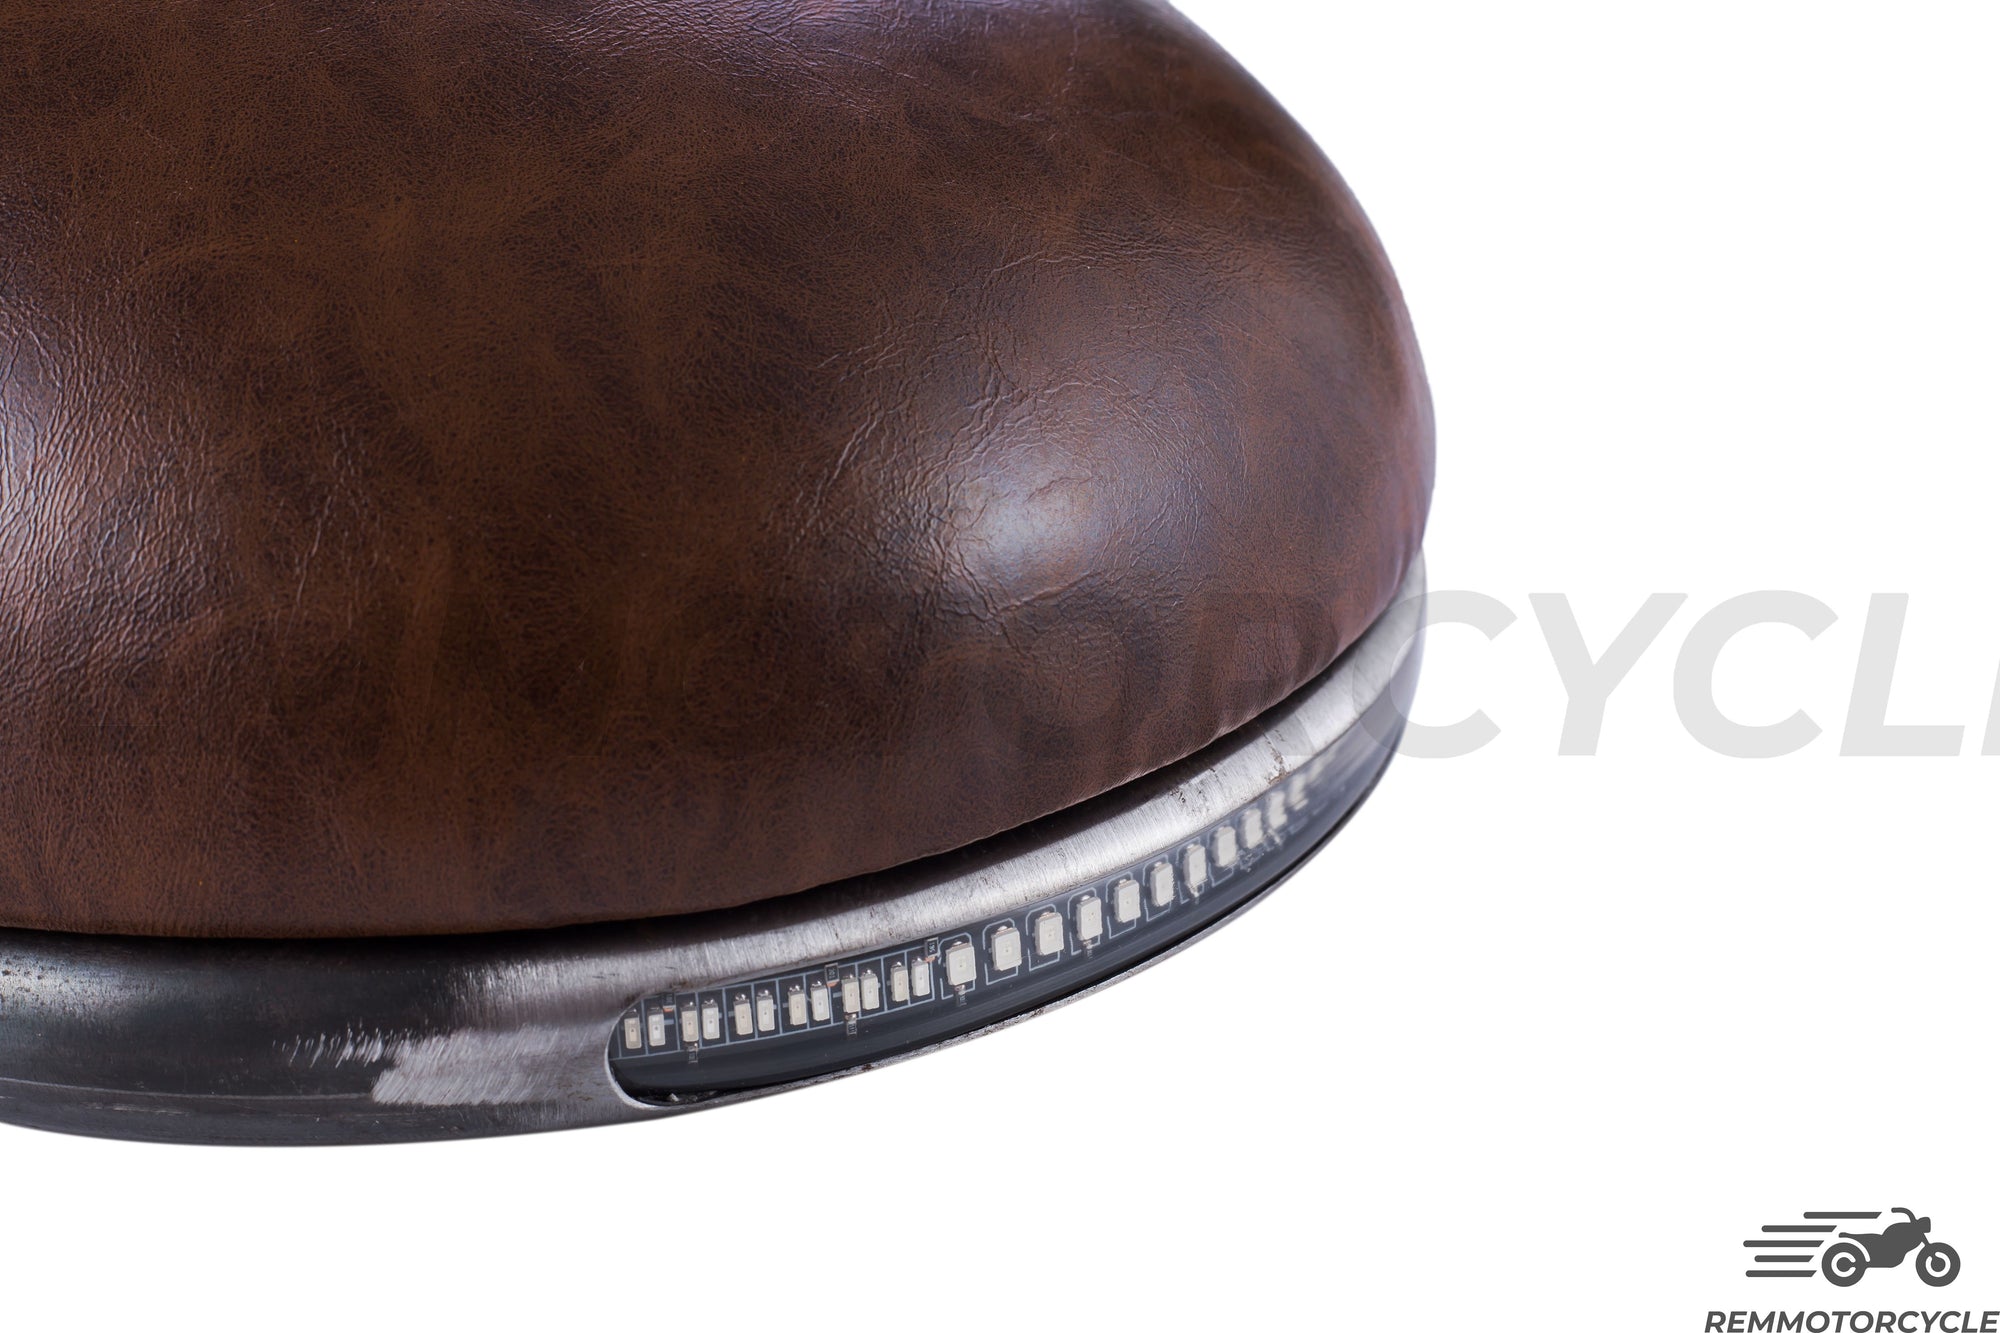 Brown Vintage Motorcycle Saddle with Frame Buckle and Integrated LED Lights